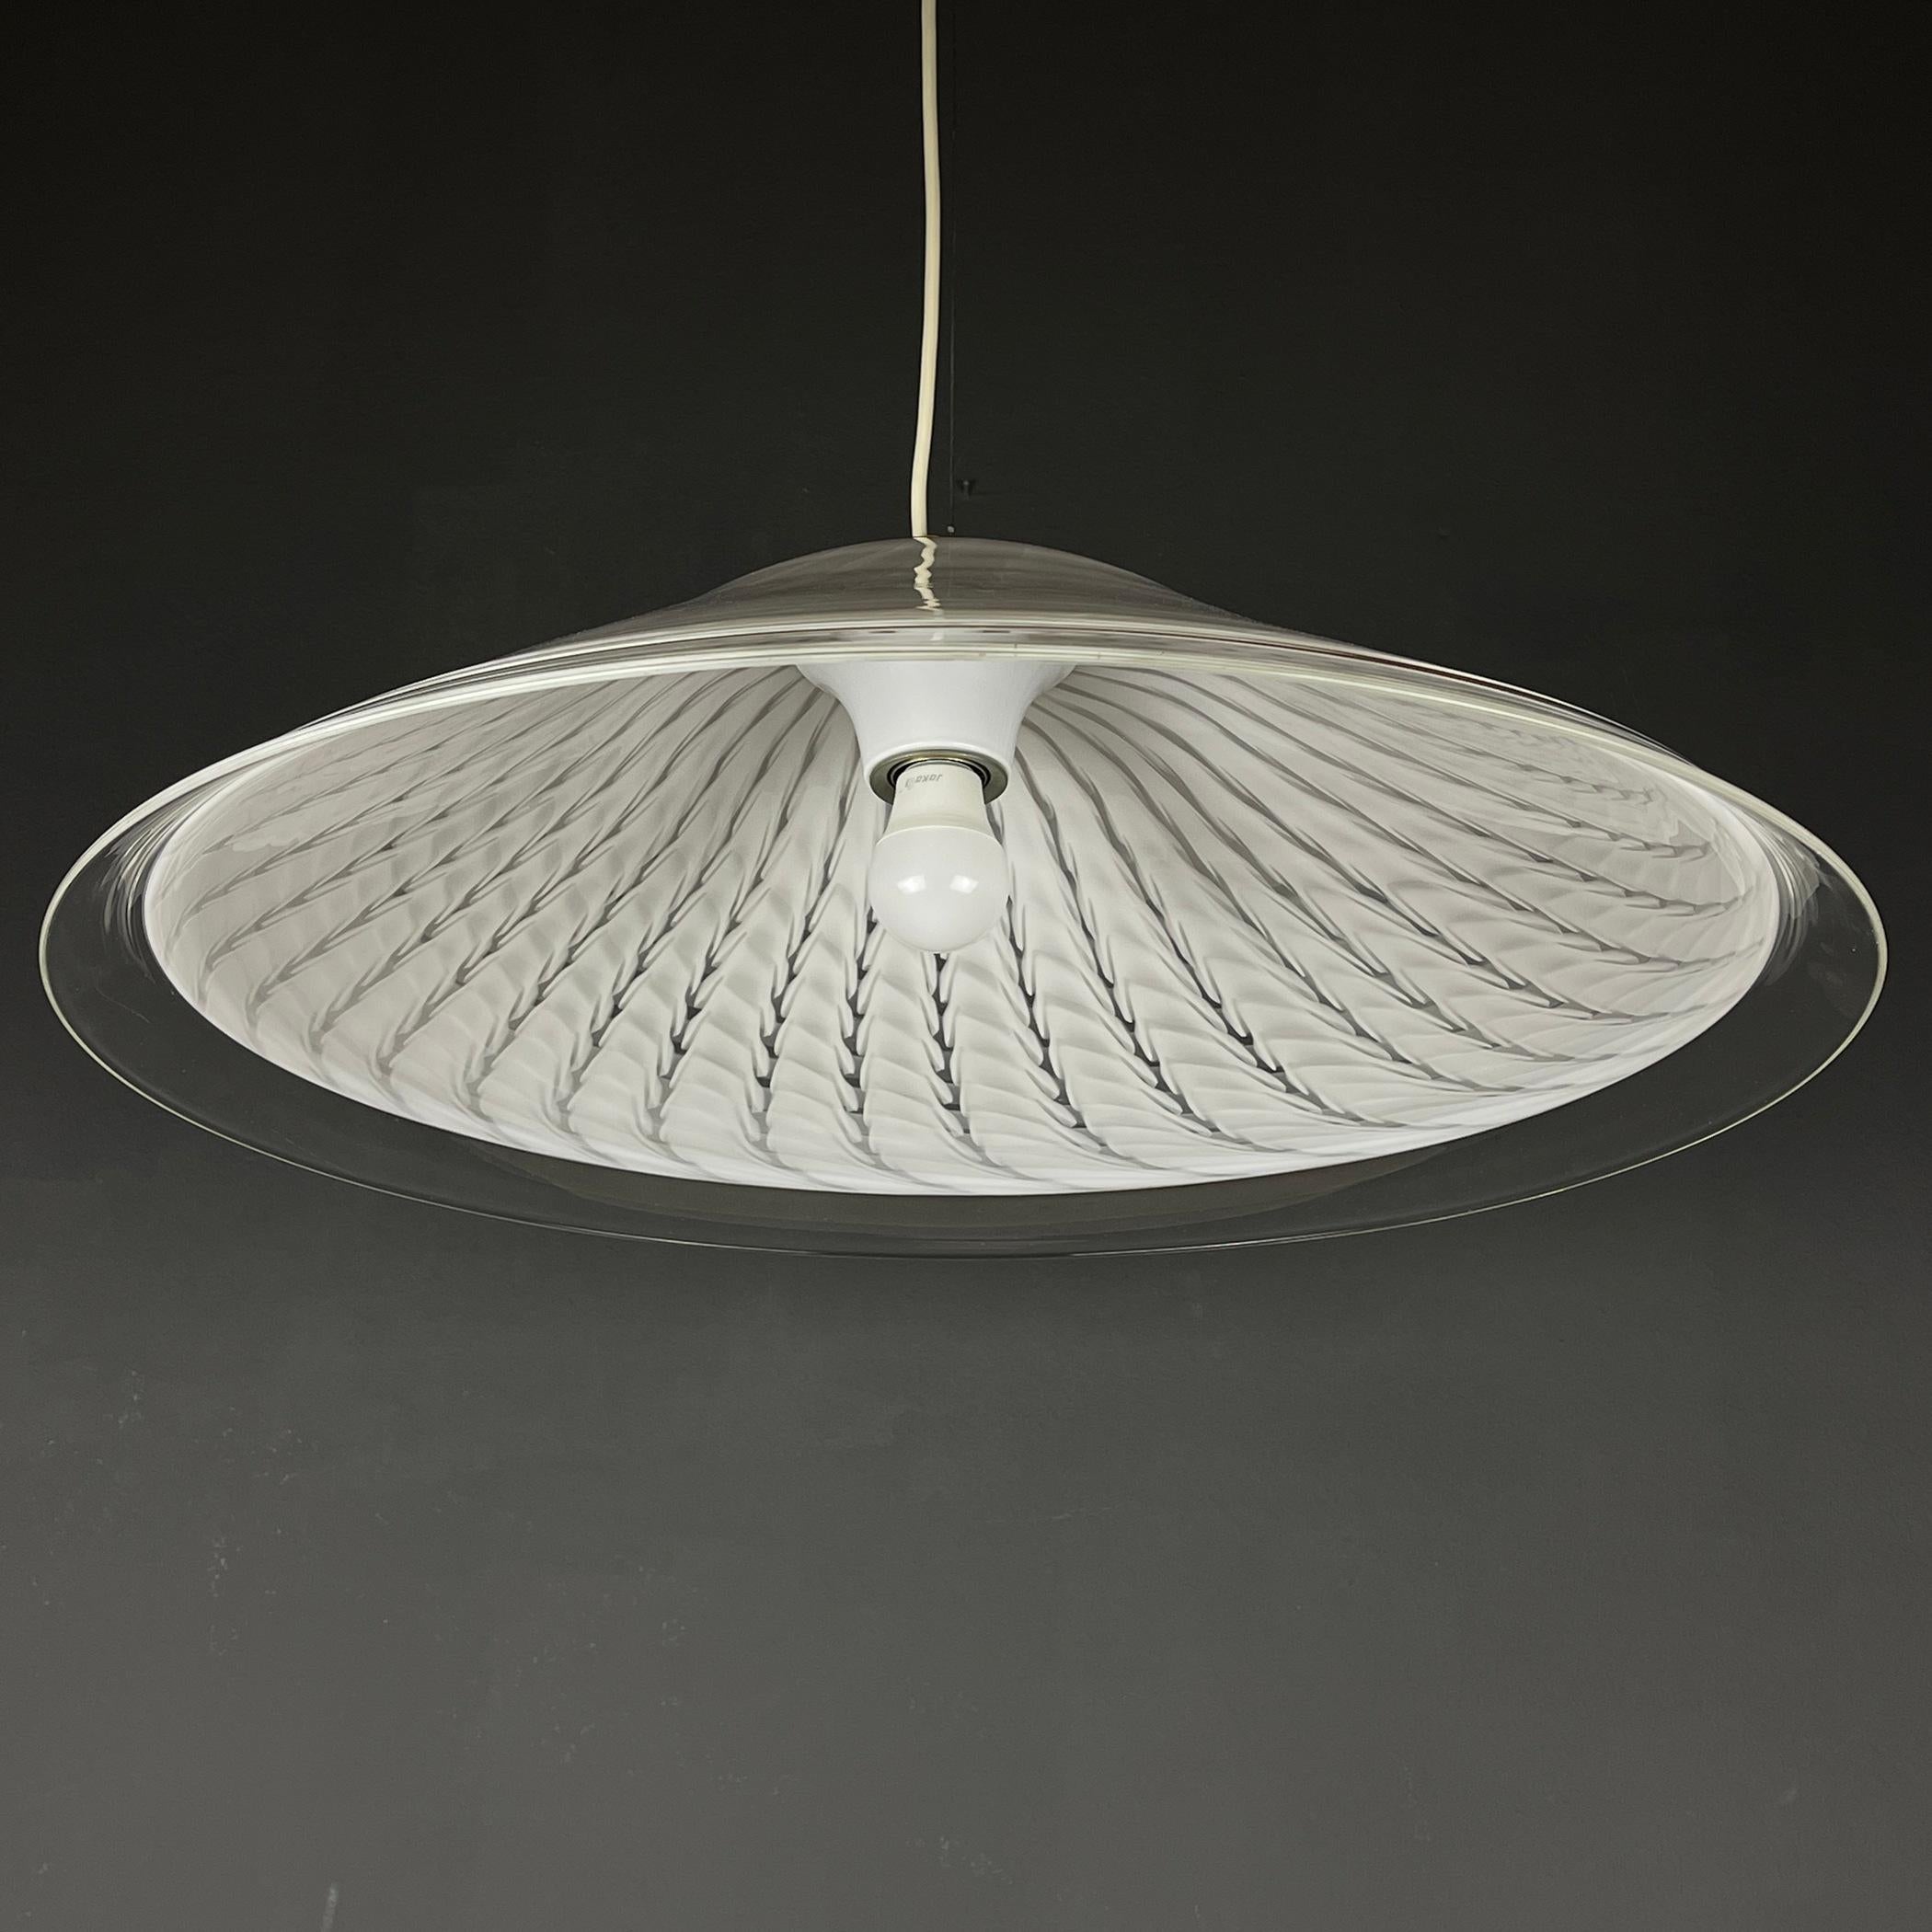 Vintage Swirl Murano Glass Pendant Lamp, Italy, 1970s For Sale 2